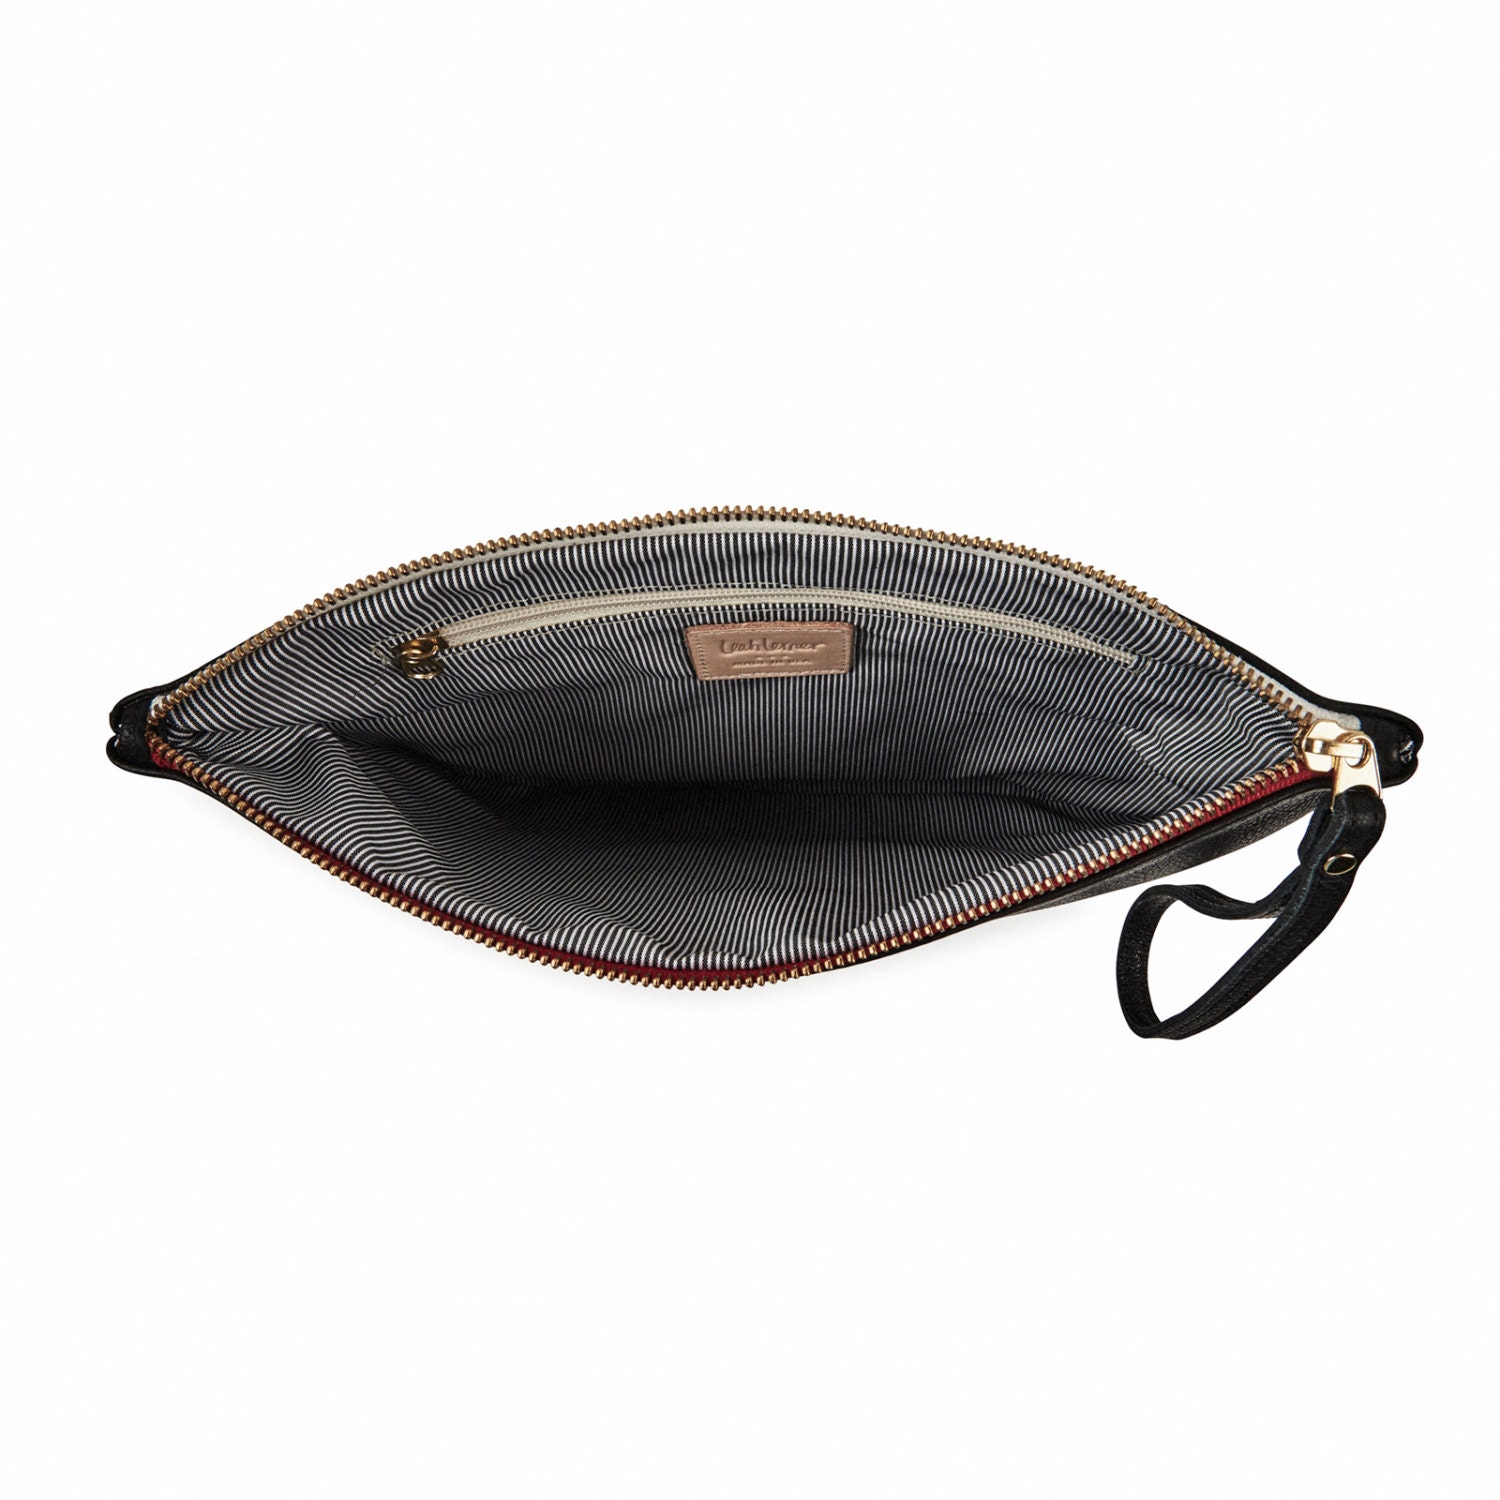 Brown leather clutch evening bag foldover leather clutch bag